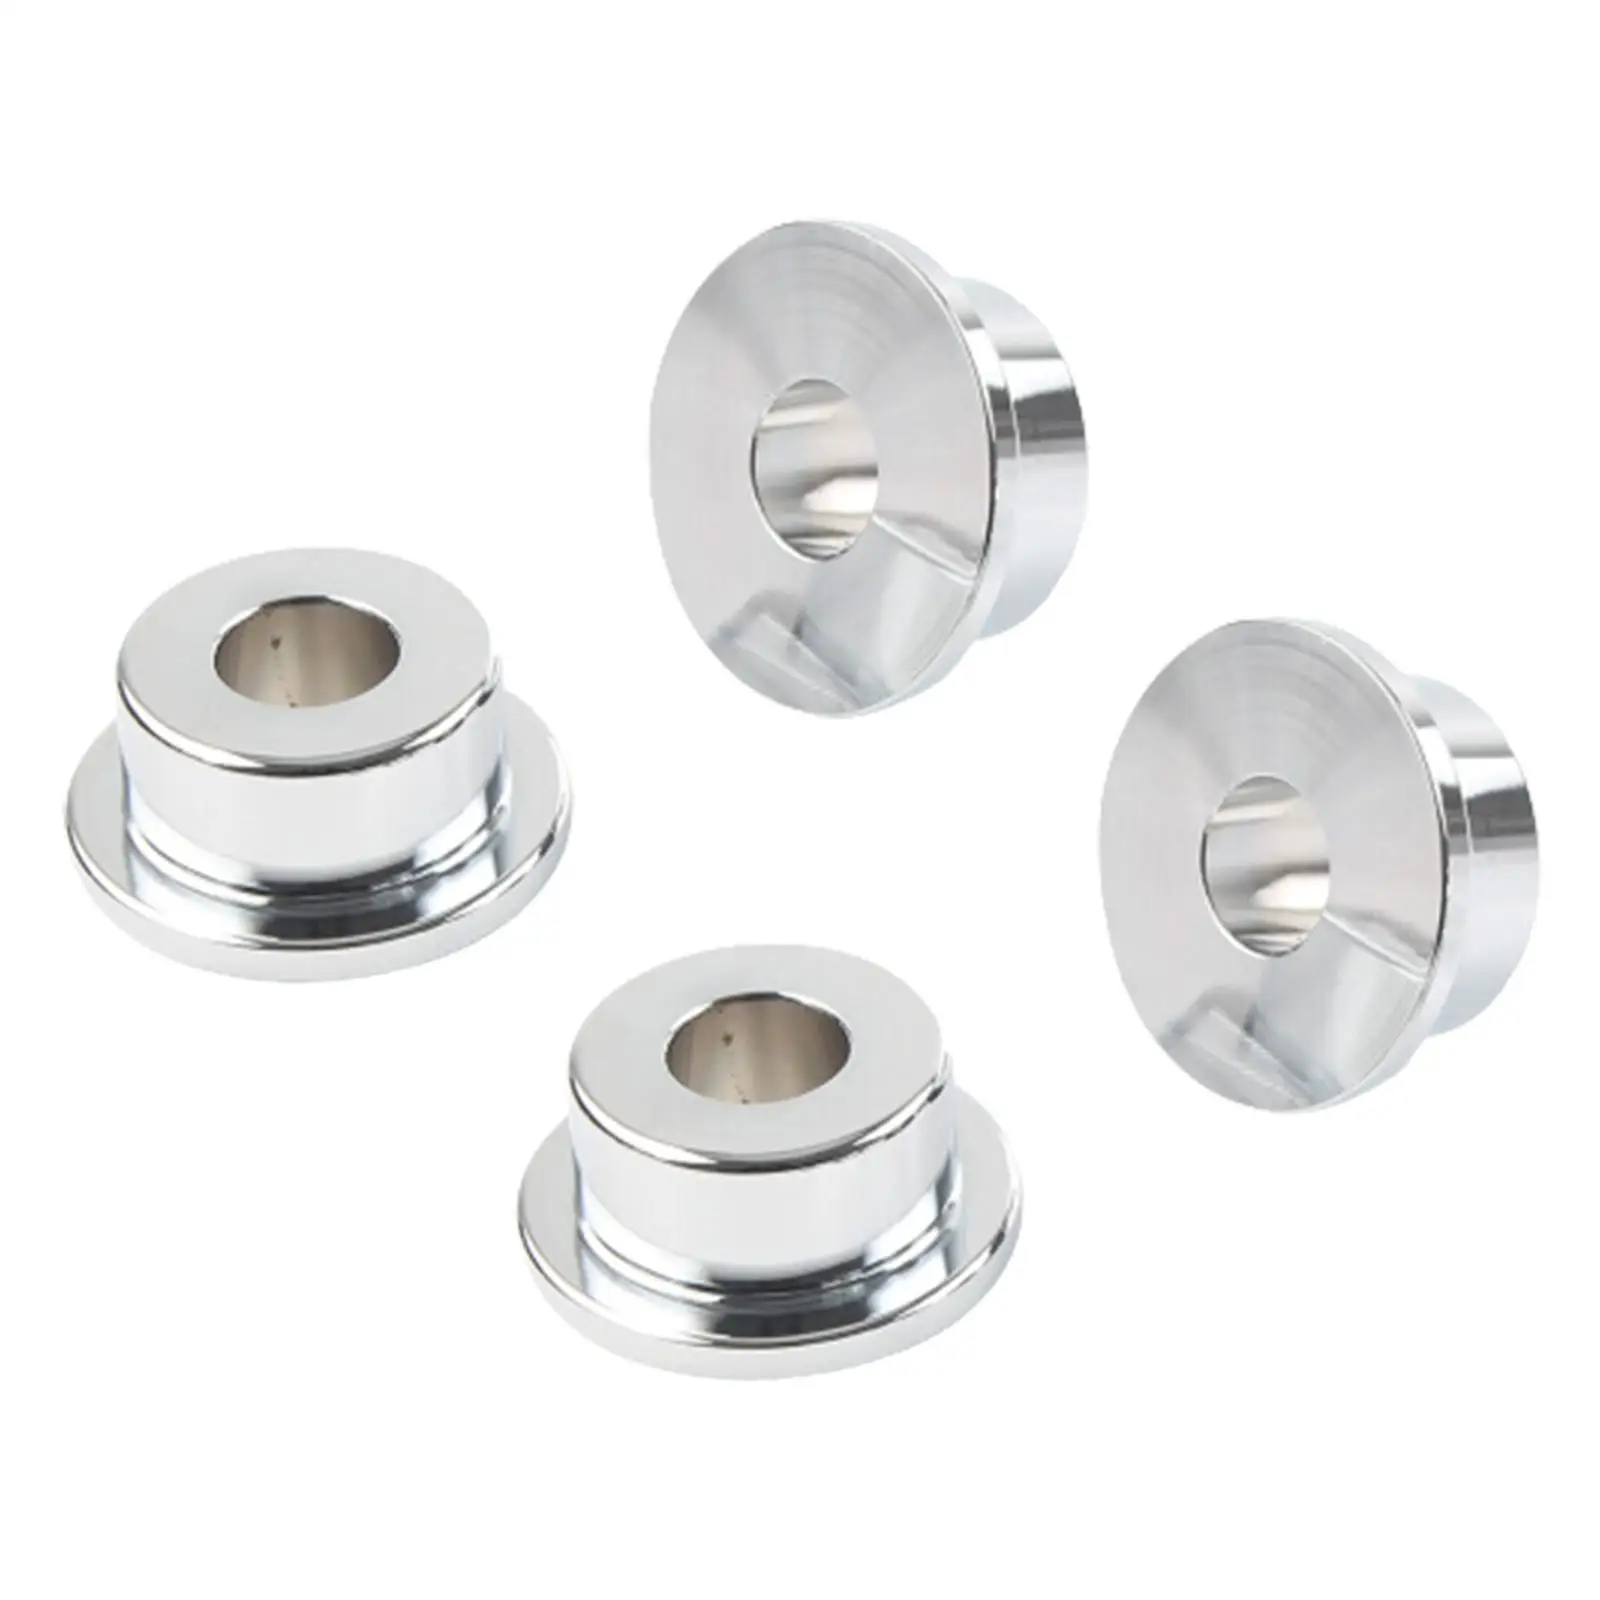 4 Pieces Handlebar Riser Bushings Mounts replacement Harley Sportster FX Softail Deuce Models Fine Surface Processing